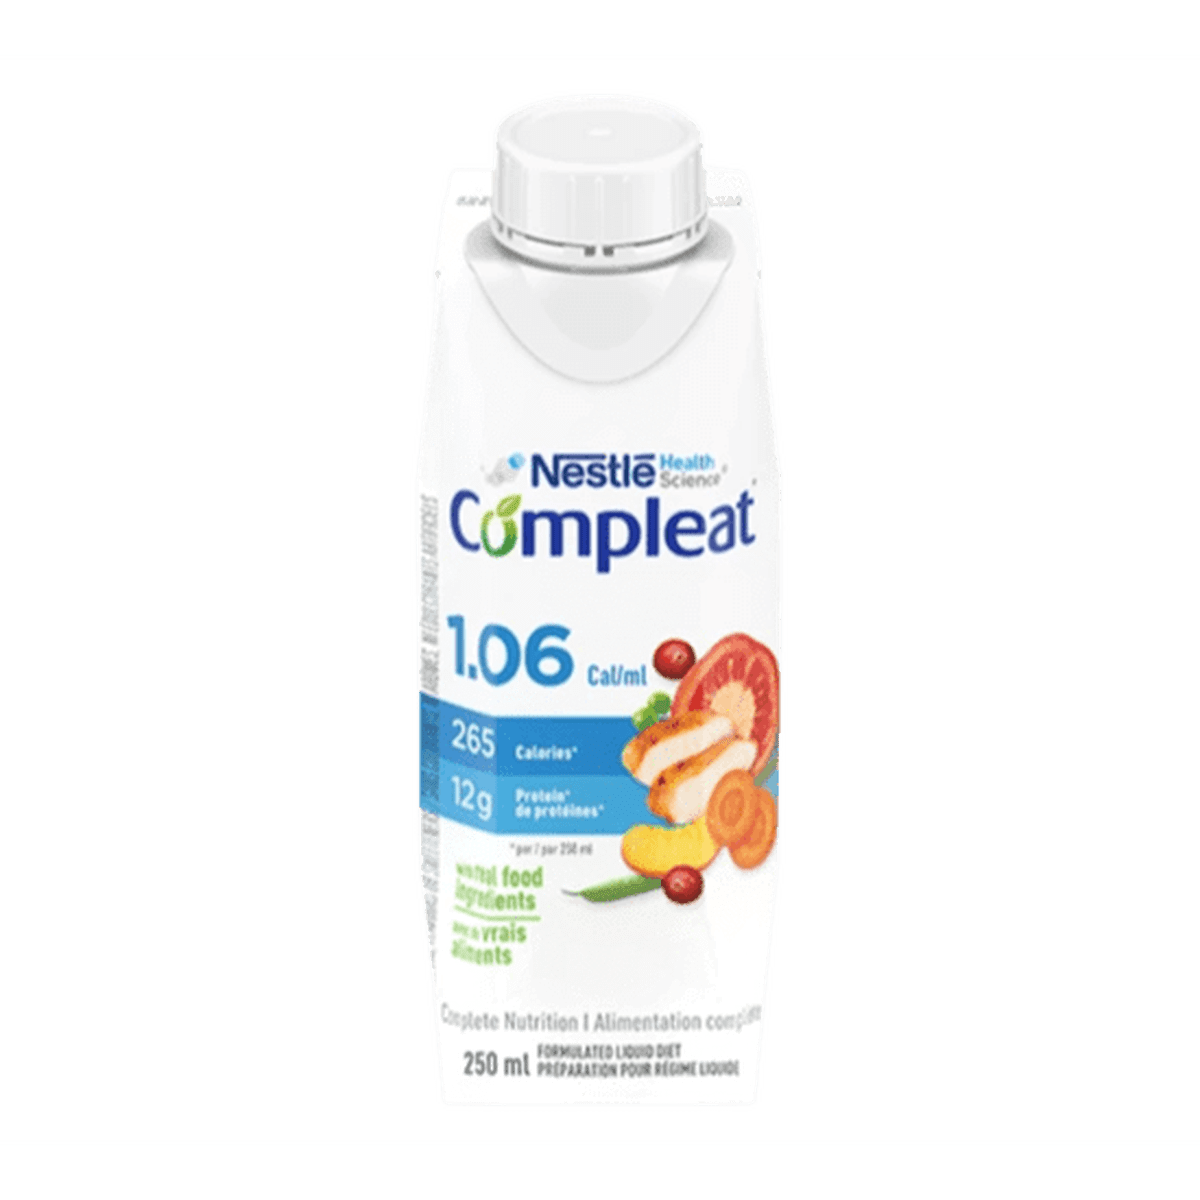 Compleat® 1.06 Tetra  Nestle Health Science   